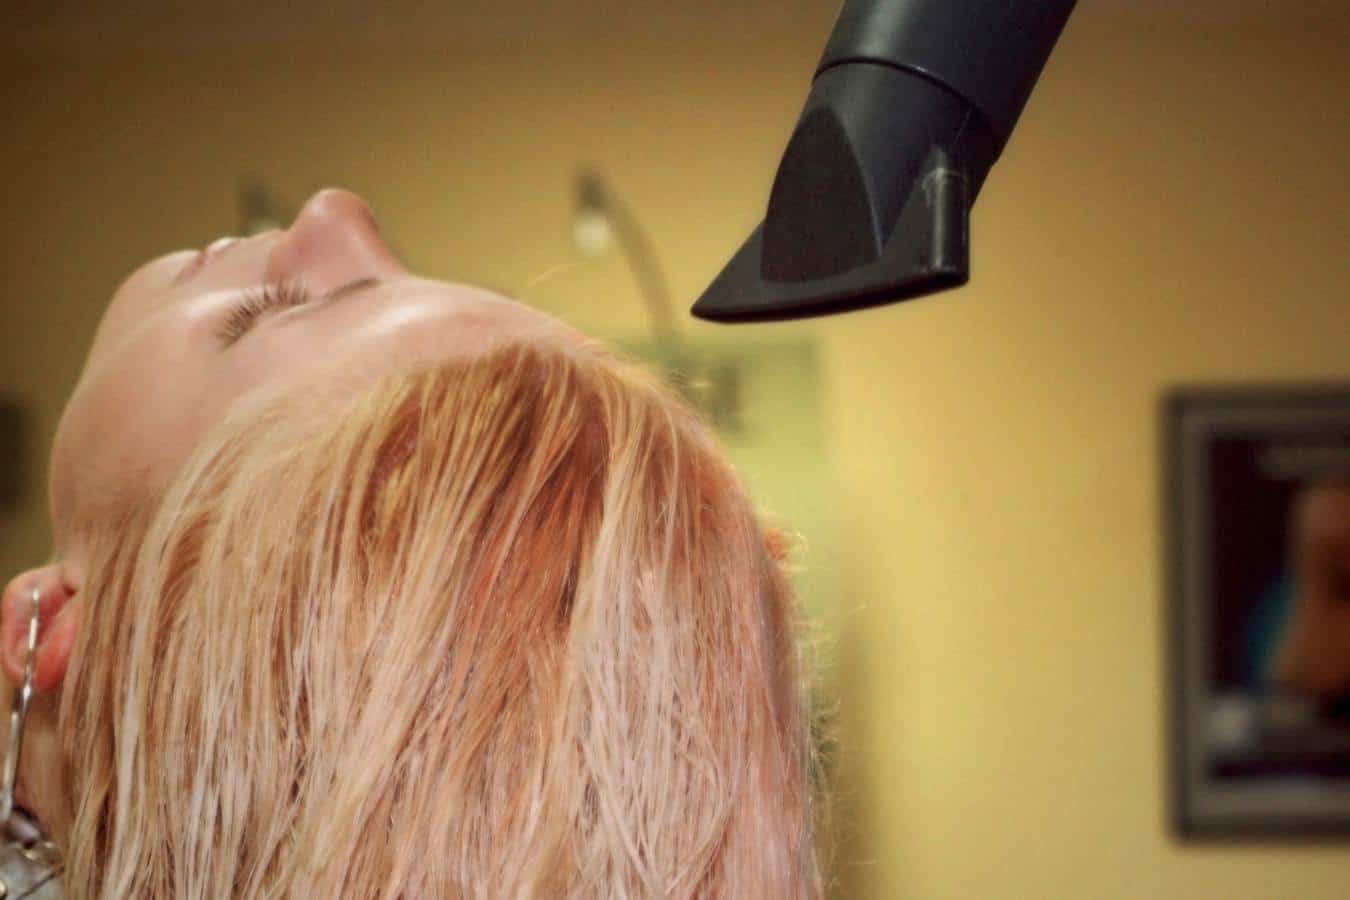 How To Use A Blowdryer When Coloring Hair At Home